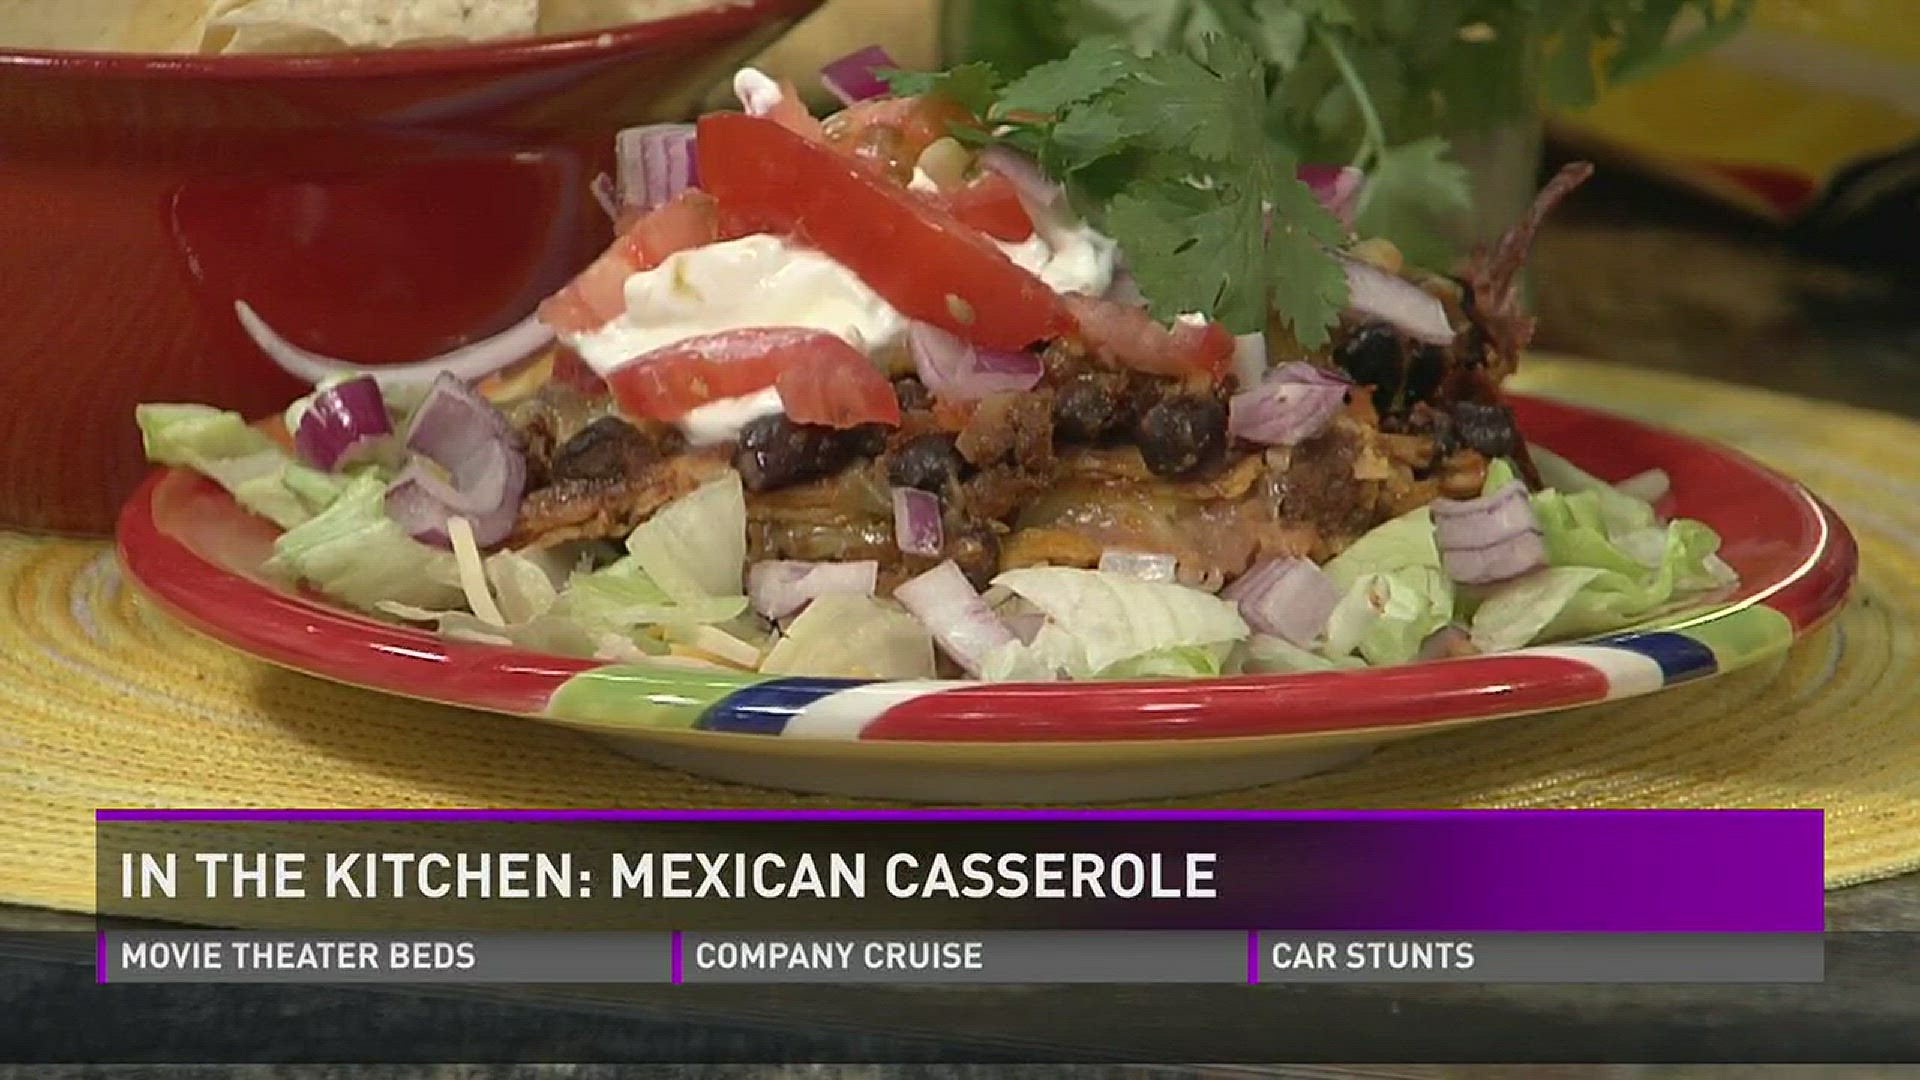 Kim Wilcox from It's All So Yummy Cafe joined 10News at Noon to show how to make Mexican casserole.